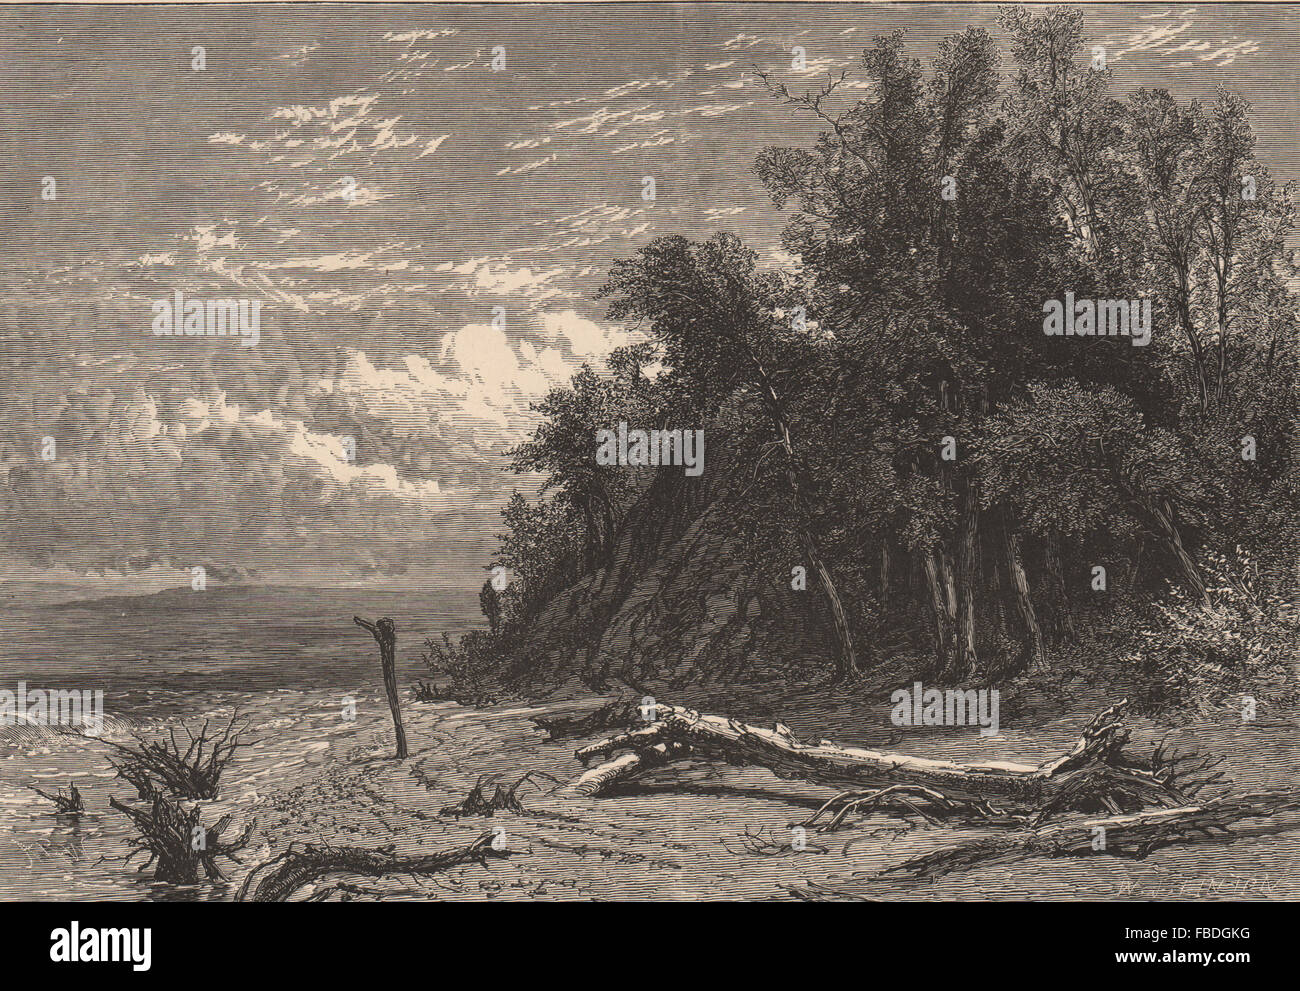 ILLINOIS: The Shore at Lake Forest, antique print 1874 Stock Photo